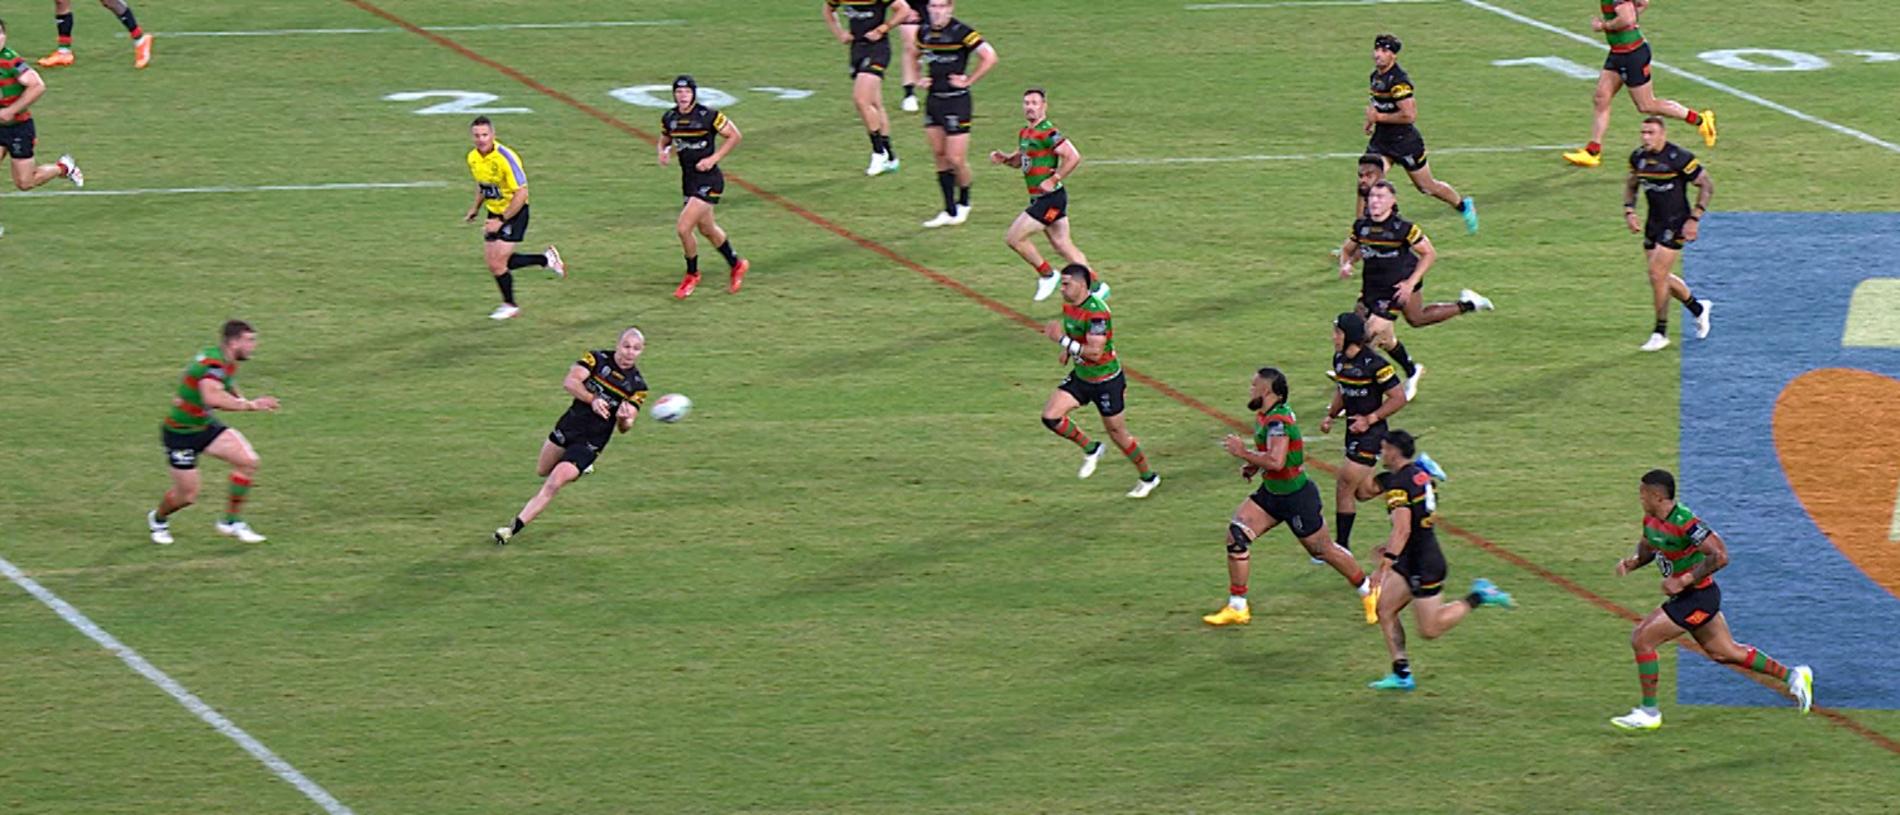 The Souths players were walking back onside.